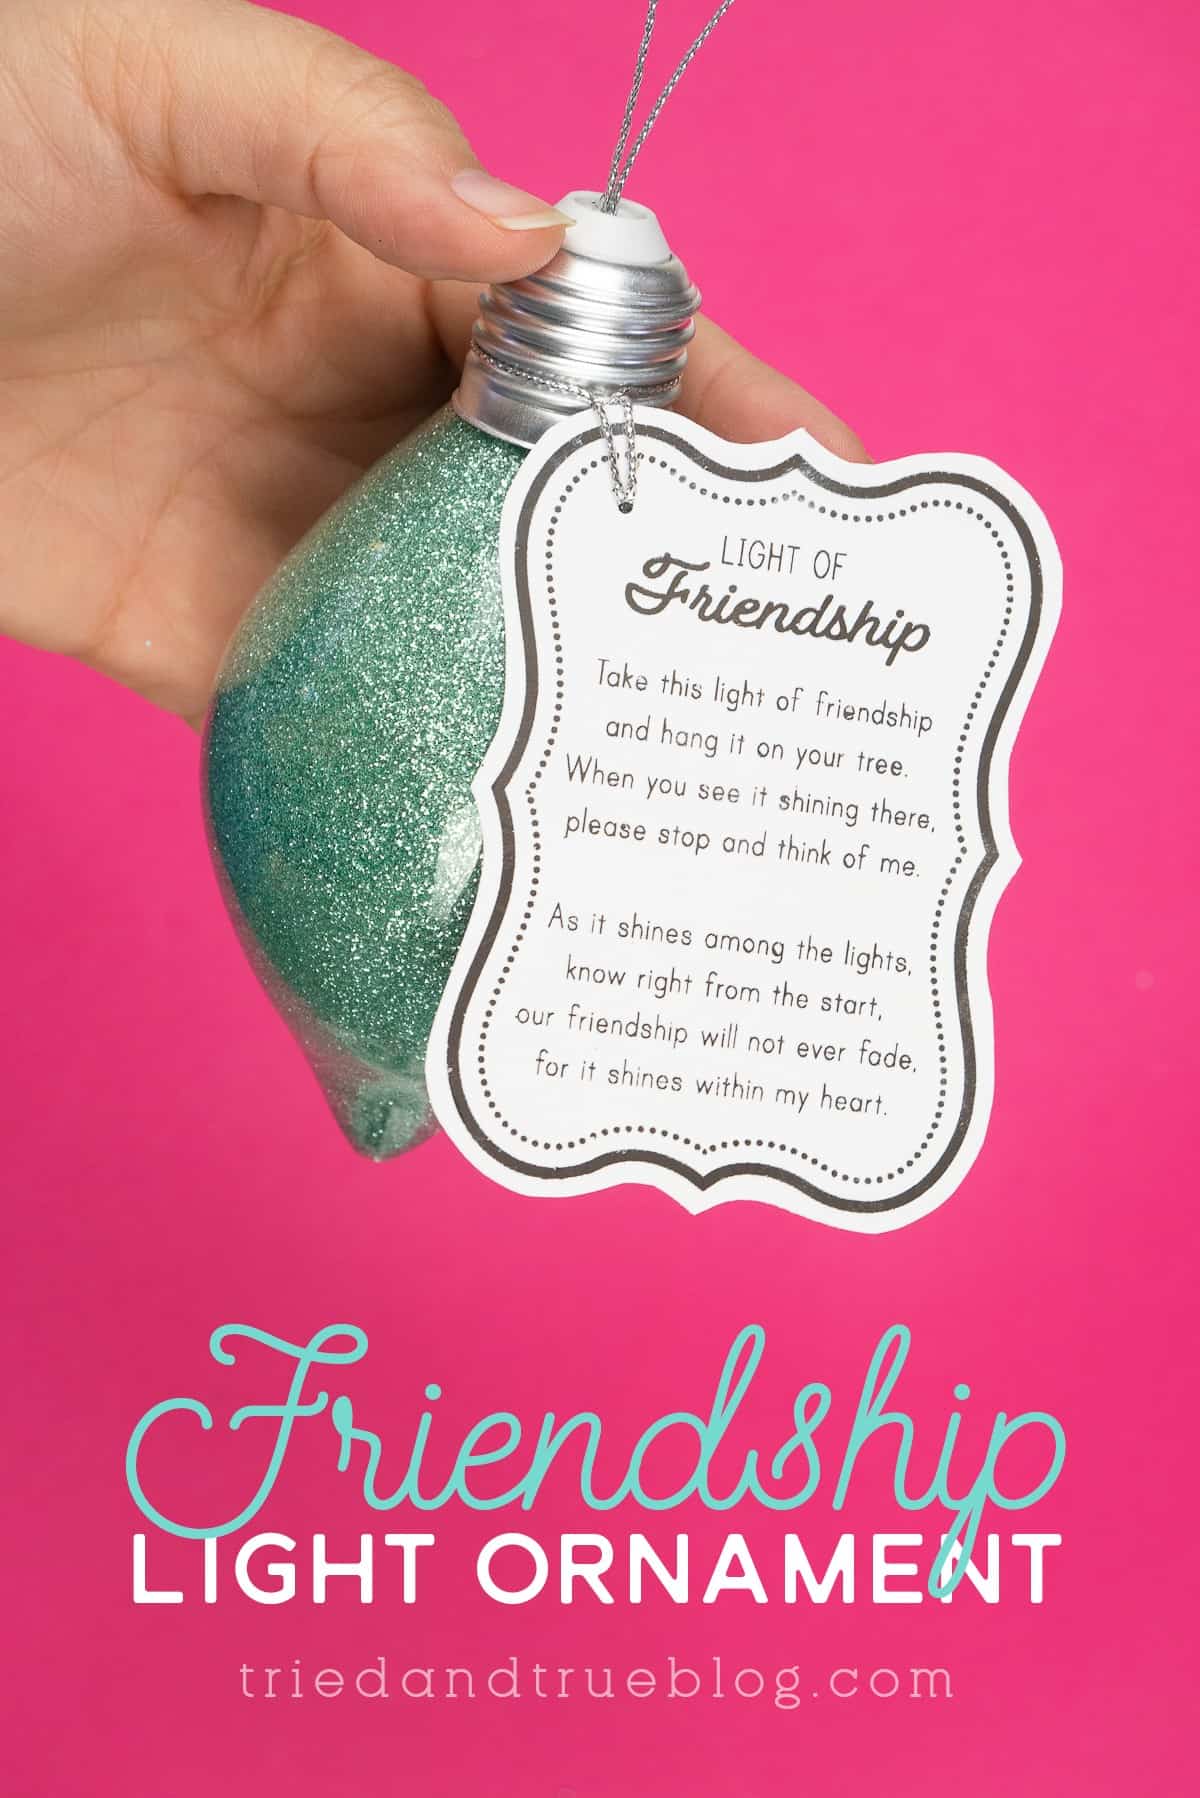 Hand holding a glittered ornament with Light of Friendship Tag on pink background.